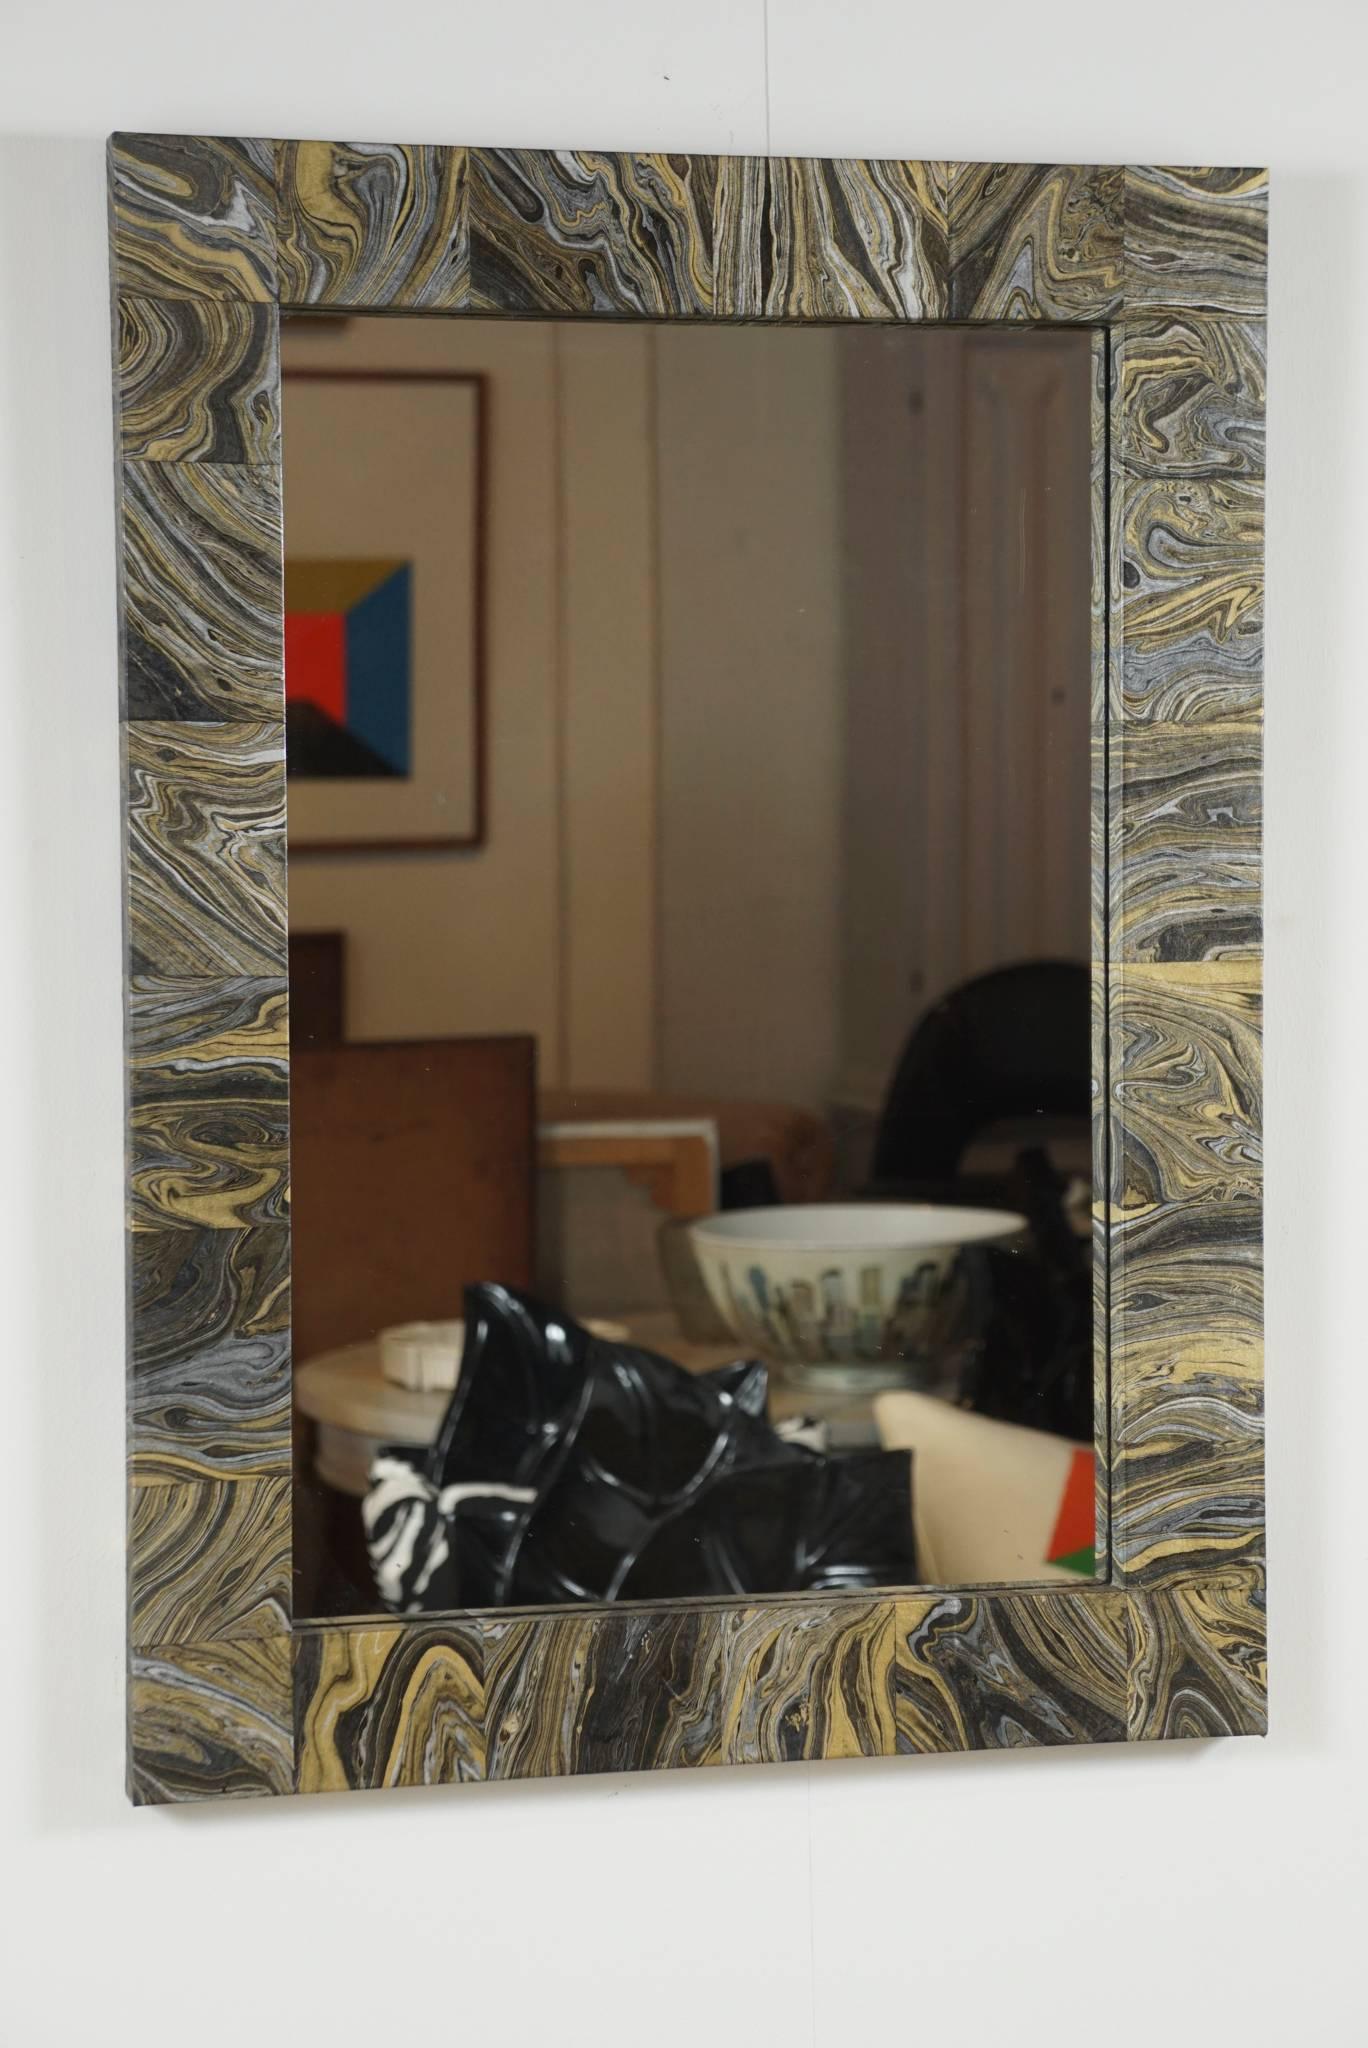 Here is a beautiful mirror that has been decoupaged with a black and gold marbleized paper. The paper has been cut to have a blocked random pattern. The frame is sealed with a brush on satin clear coat.
The surround frame measures 2.5 inches wide